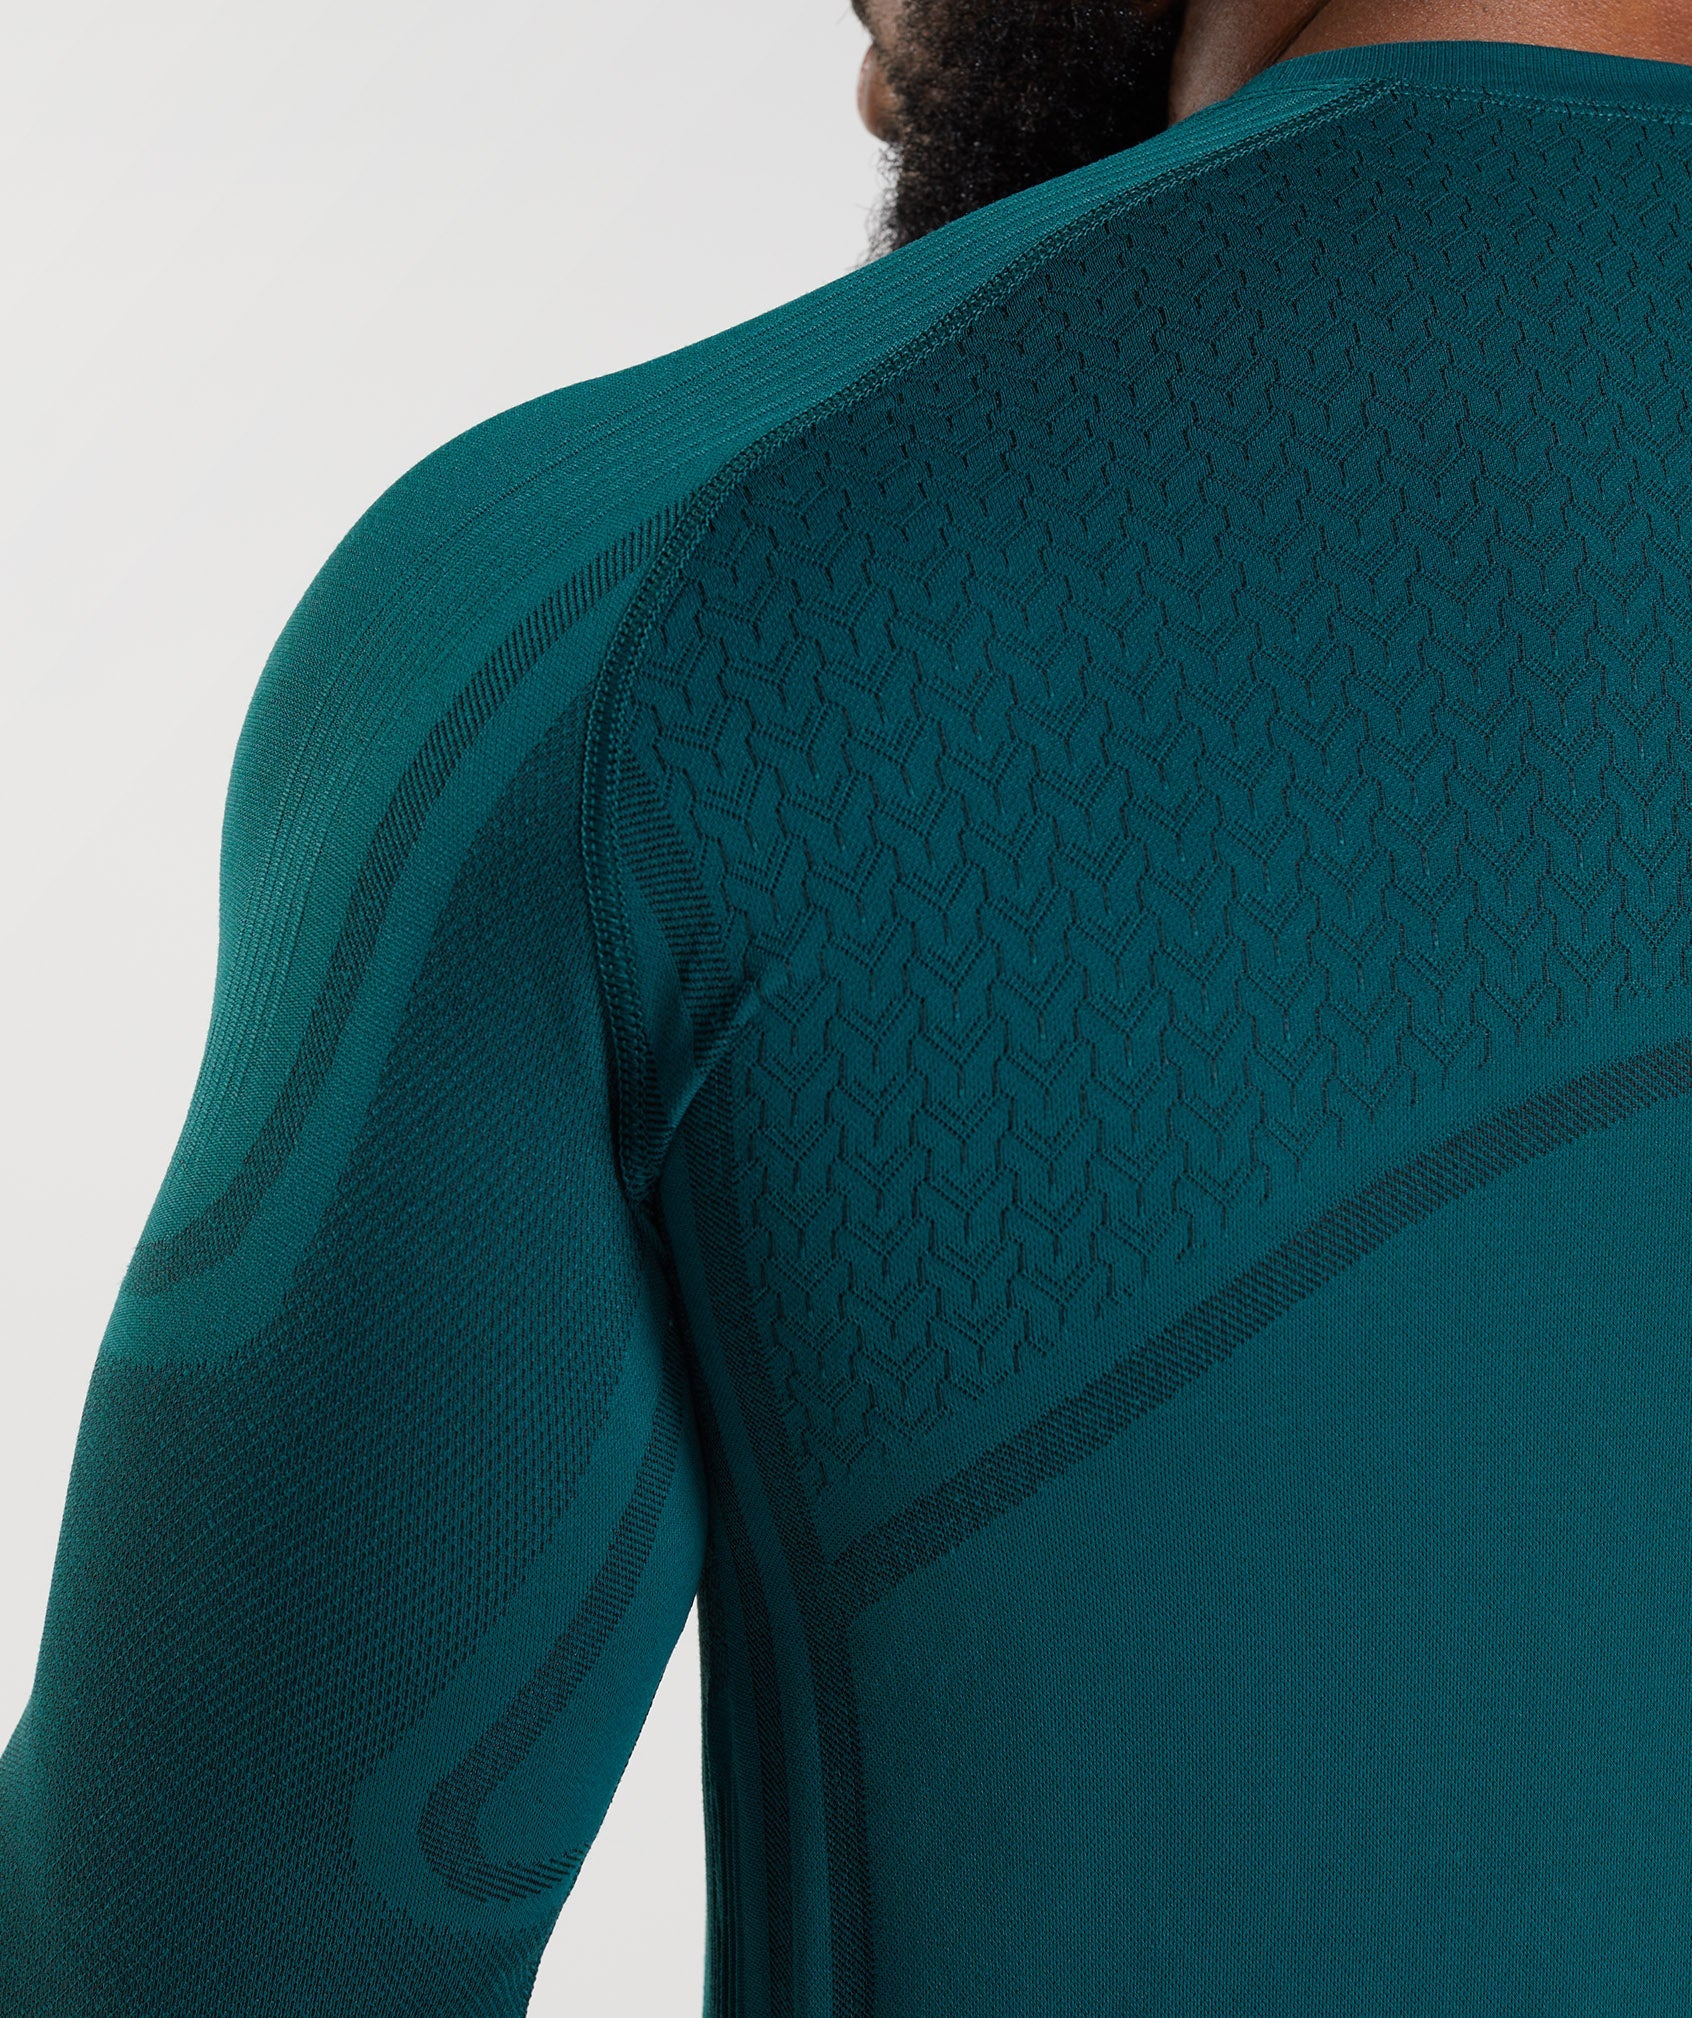 315 LS Seamless T-Shirt in Winter Teal/Black - view 6